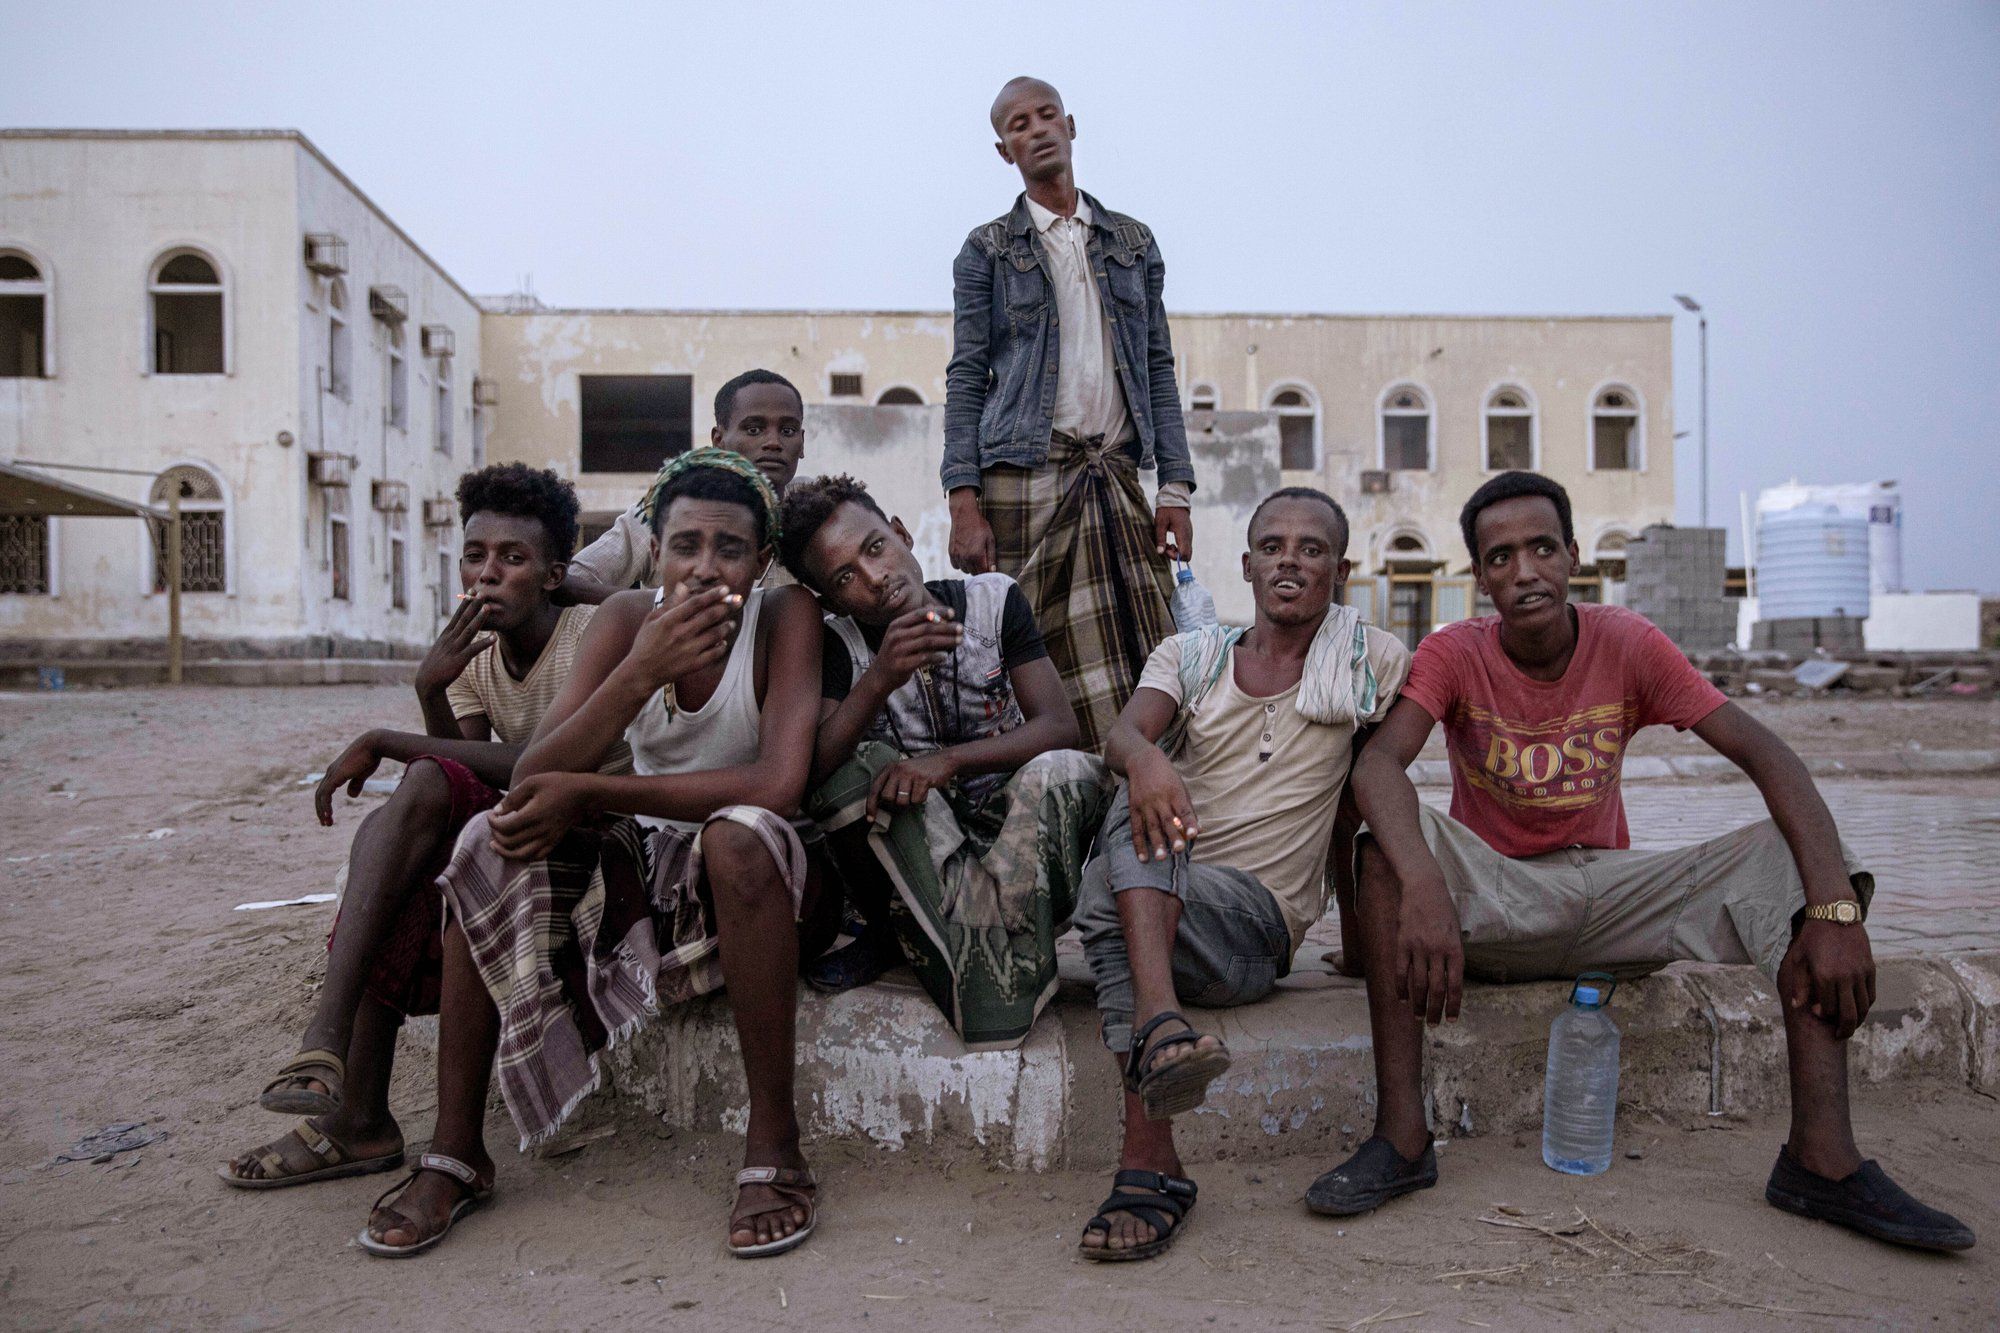 Ethiopian migrants sit together and smoke, as they take shelter in the "22nd May Soccer Stadium," destroyed by war, in Aden, Yemen. Image by AP Photo/Nariman El-Mofty.